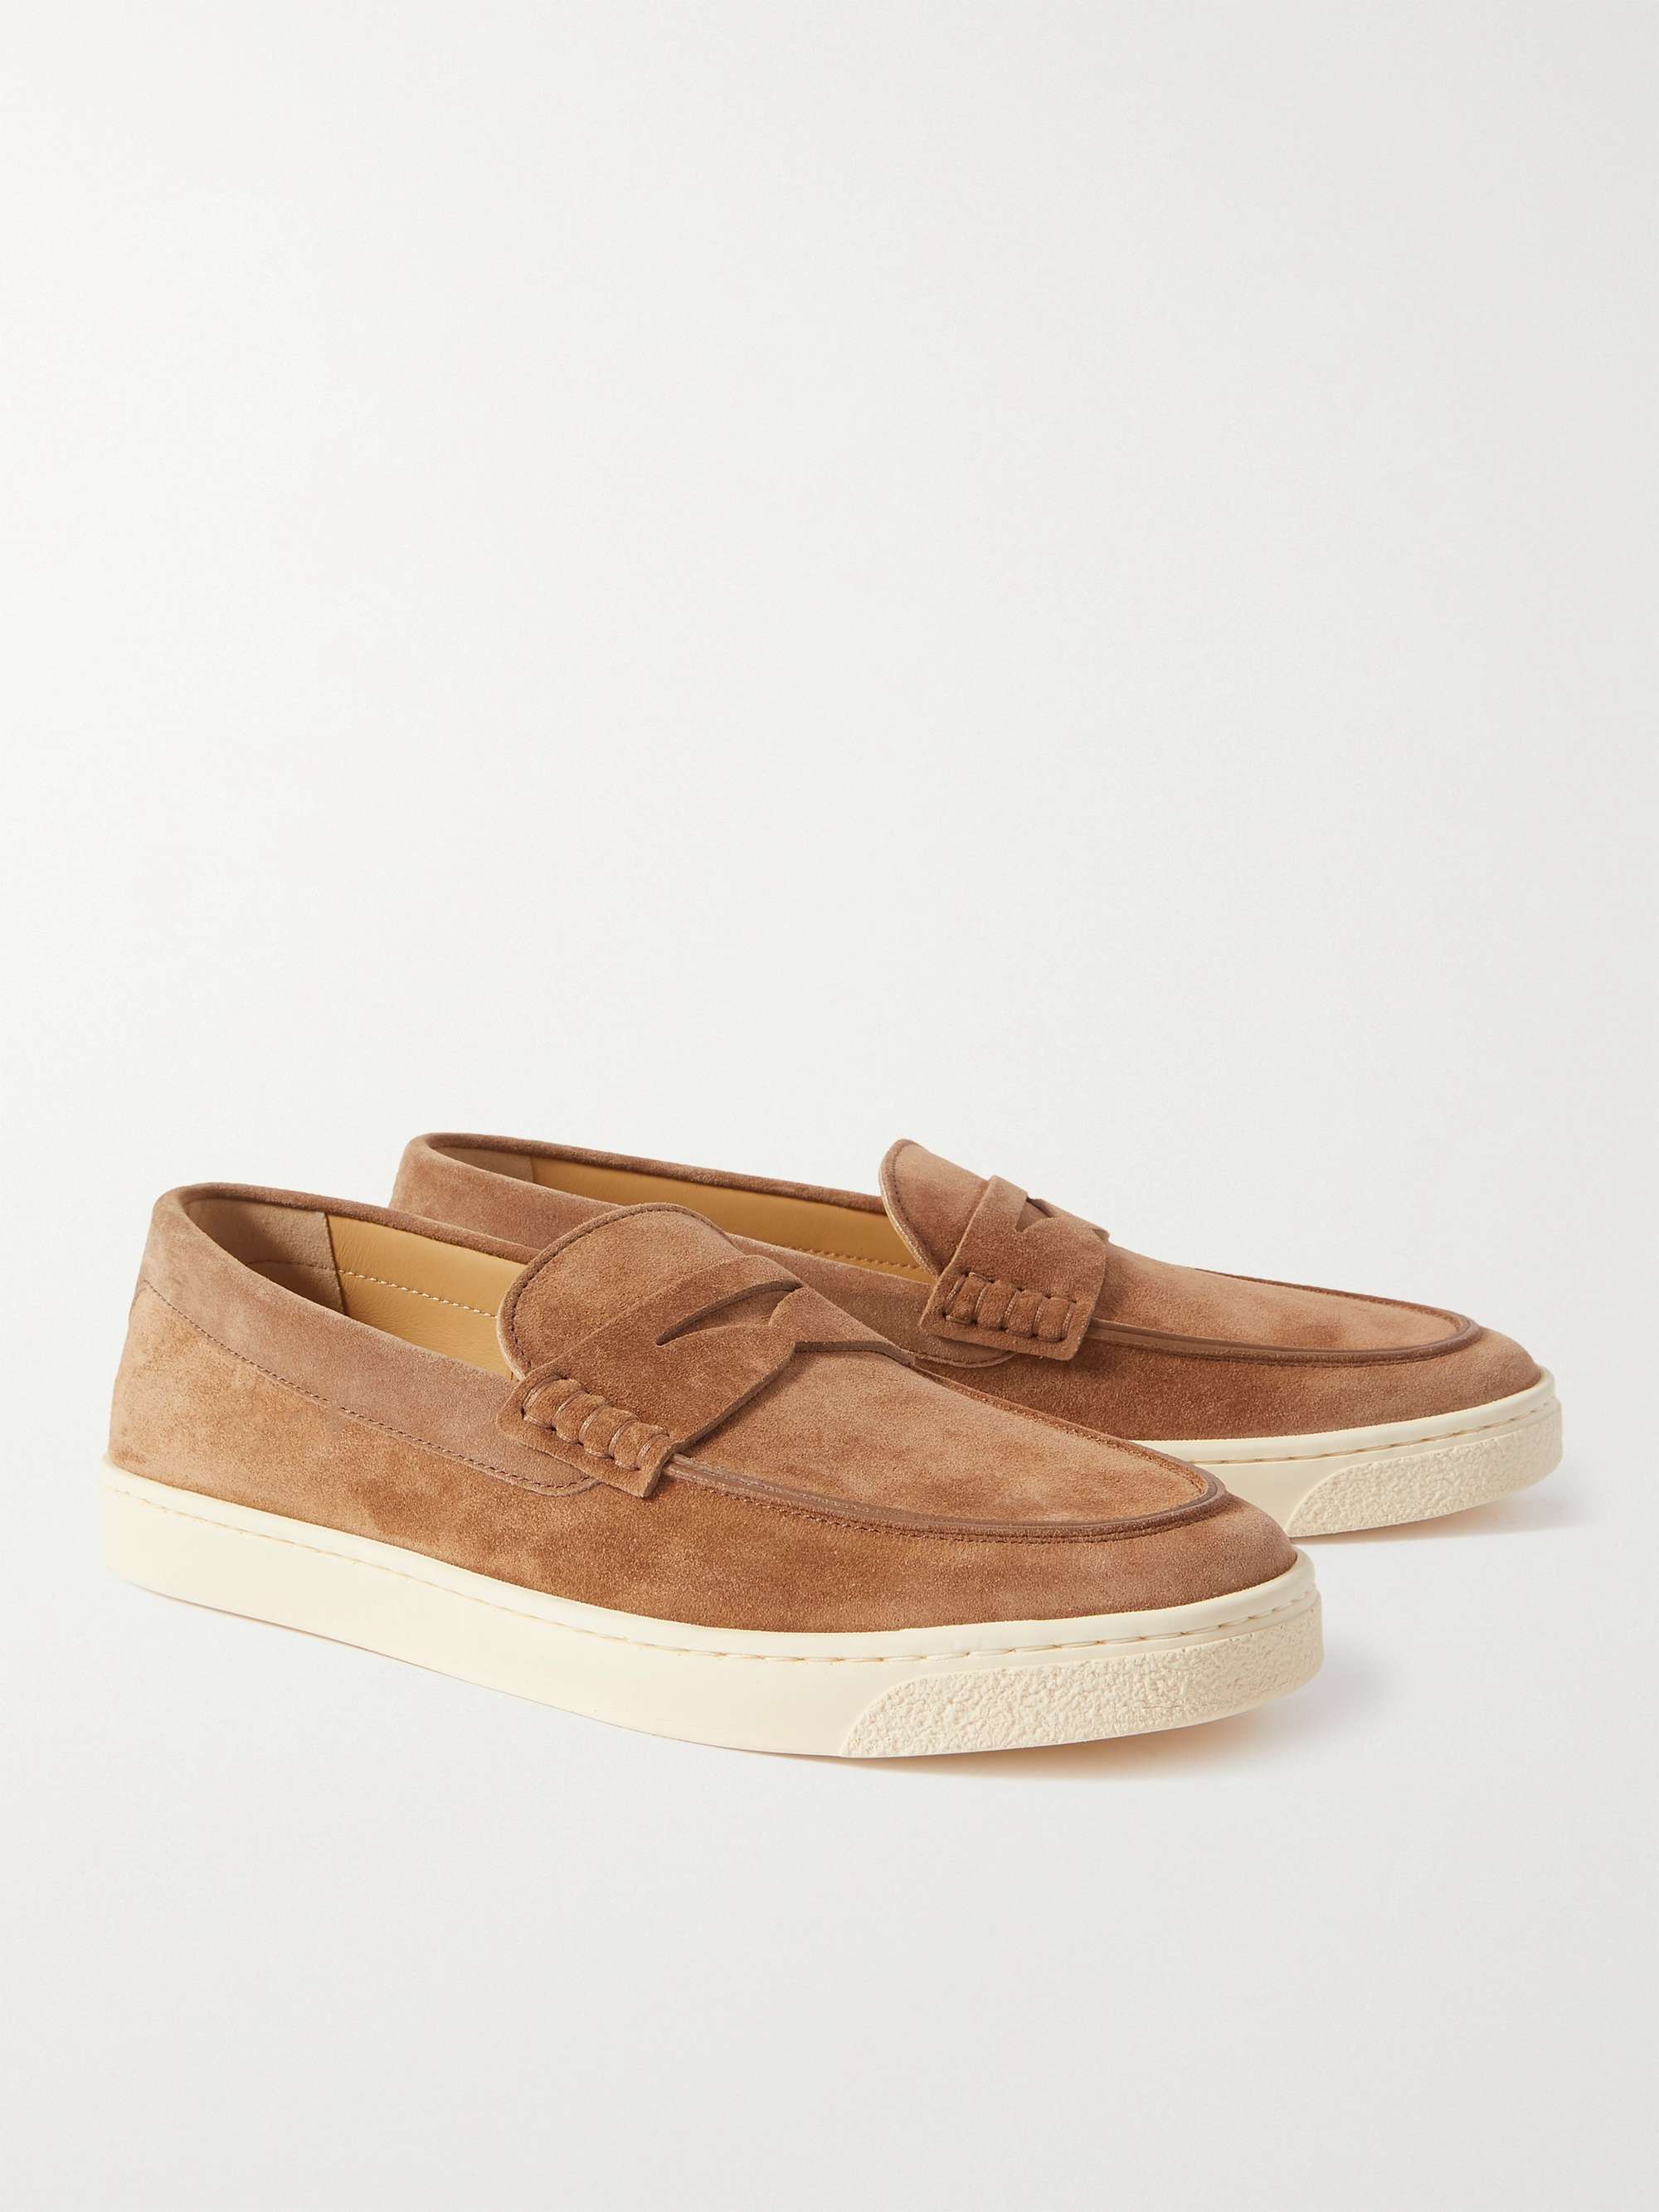 BRUNELLO CUCINELLI Suede Penny Loafers